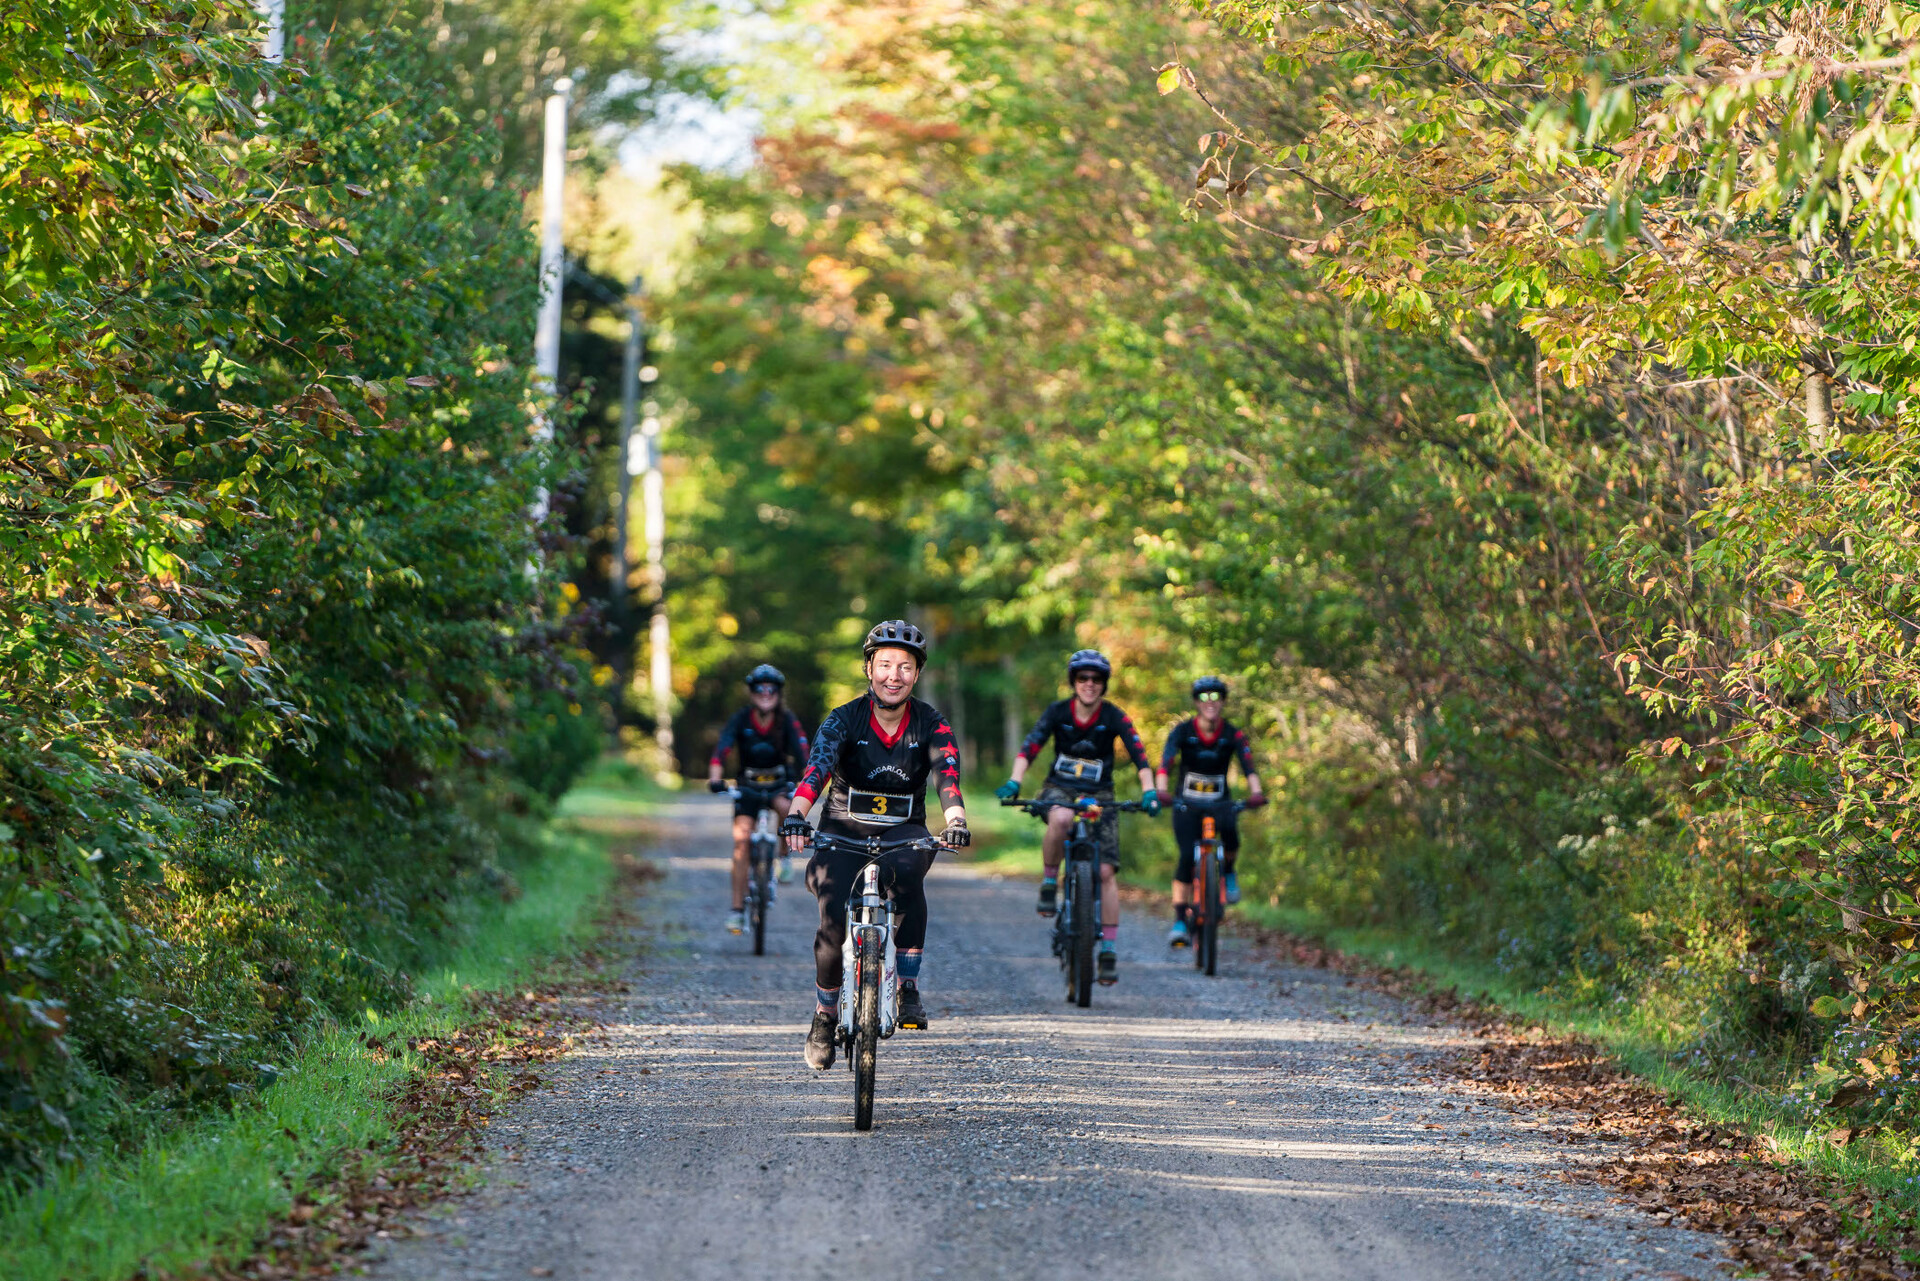 Four cyclists riding mountain bikes on a gravel trail through the woods.